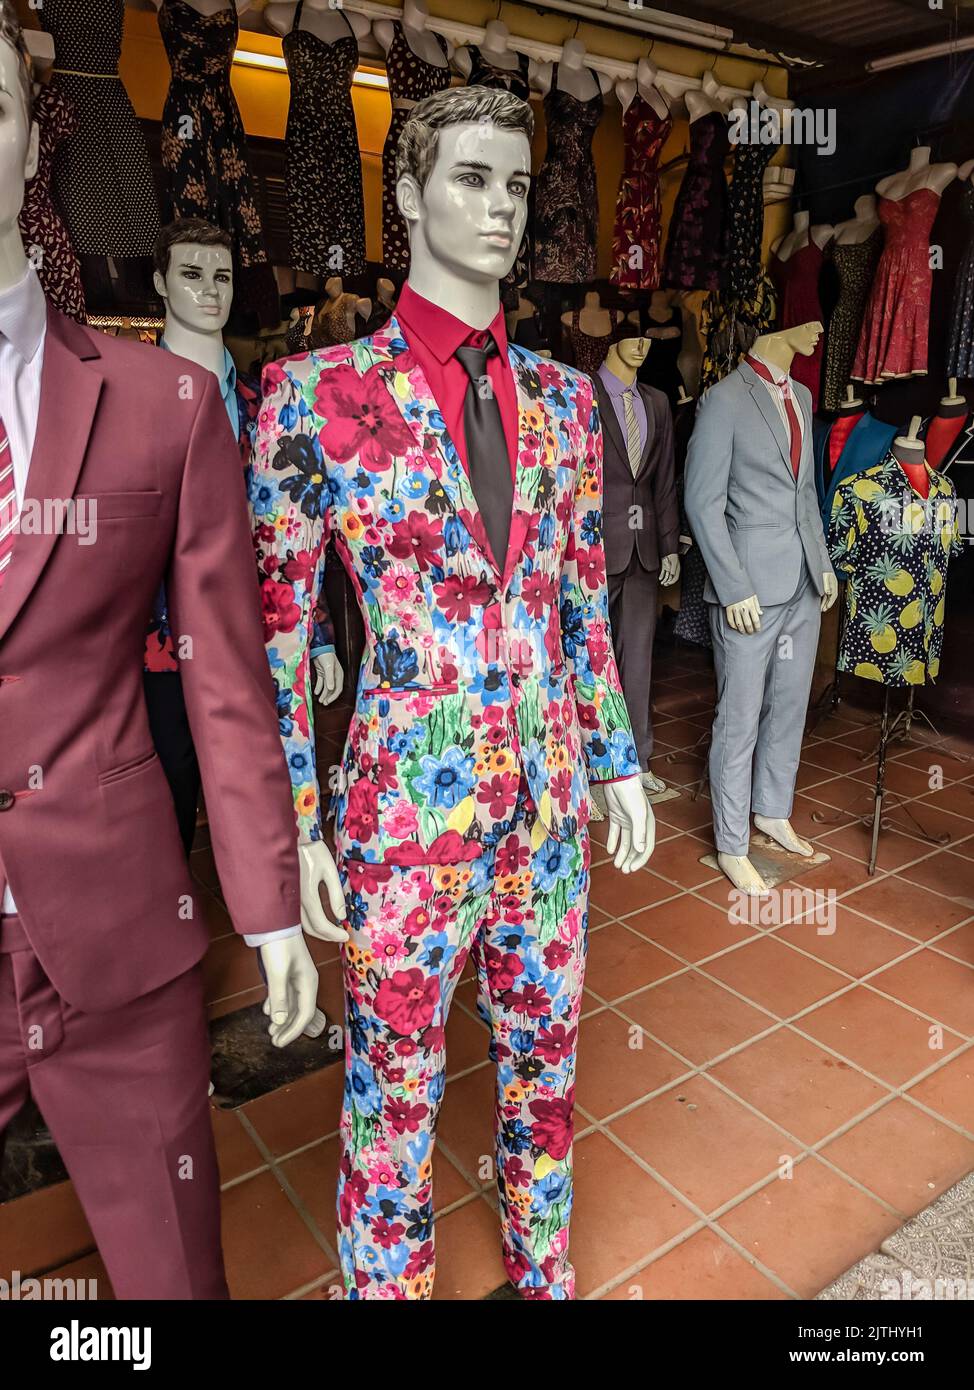 Flamboyant floral patterned suit at a tailors shop in Hoi An, Vietnam Stock Photo